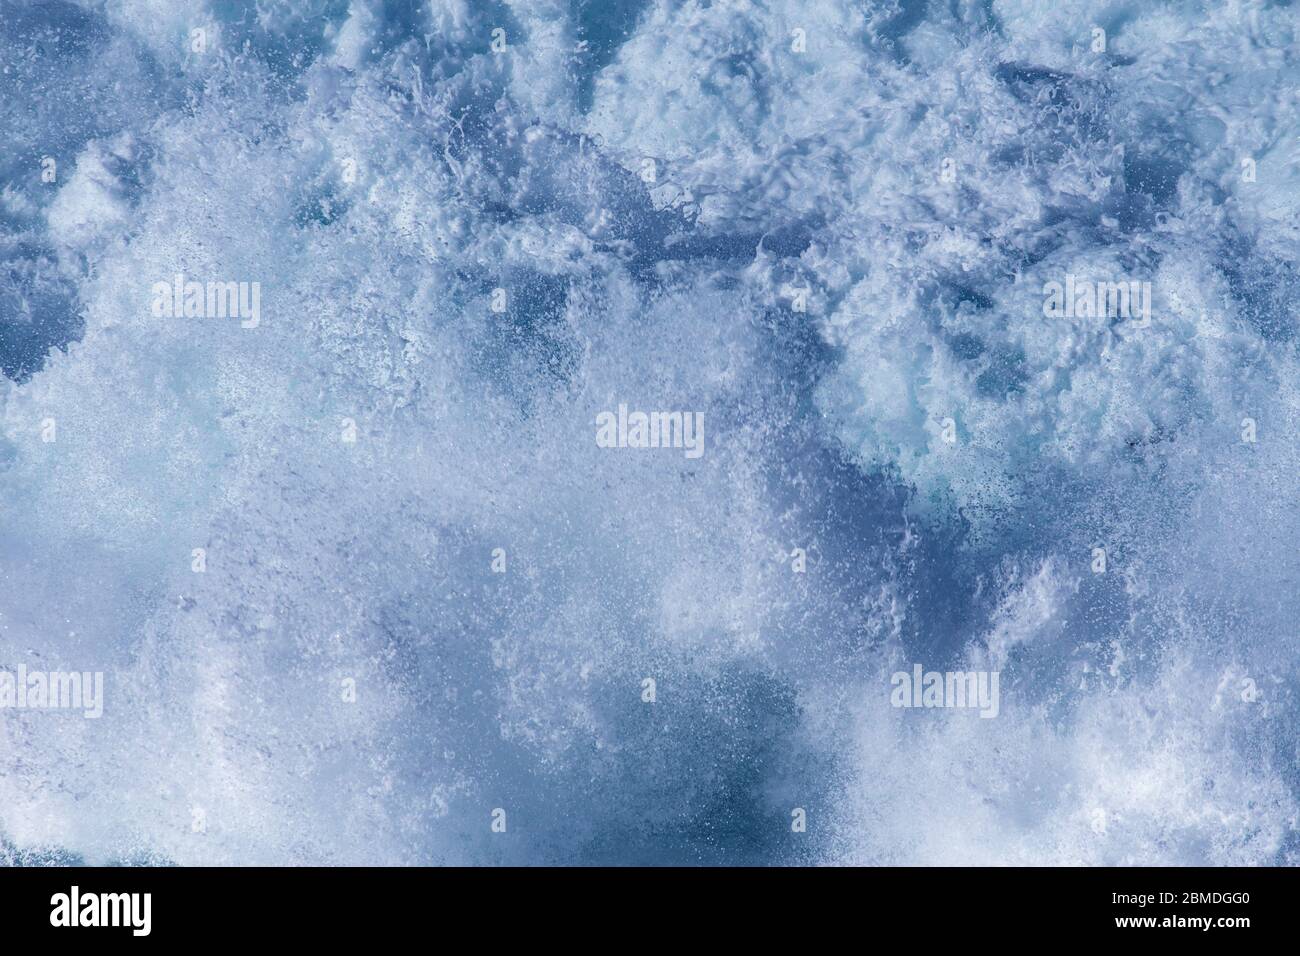 Aquatic background of sea surf waves splashing close up with clear blue green water and white foam Stock Photo